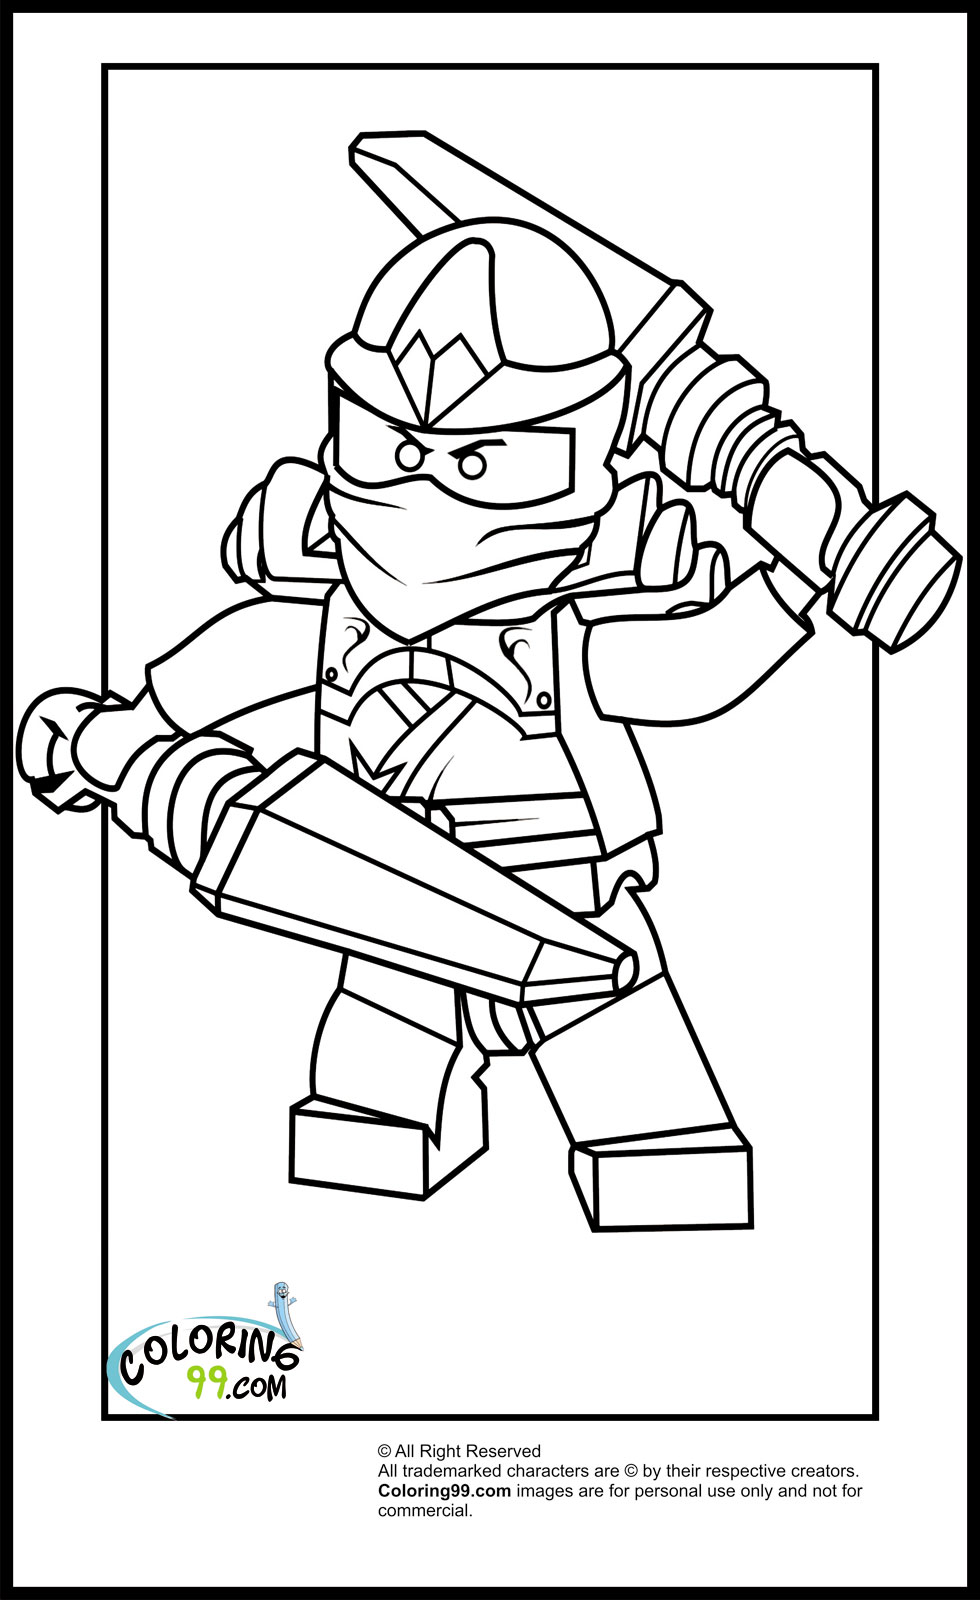 MY FRIENDS ARE THE STARS AND THE SUNS THAT MOVE ME — Ninjago Coloring Pages